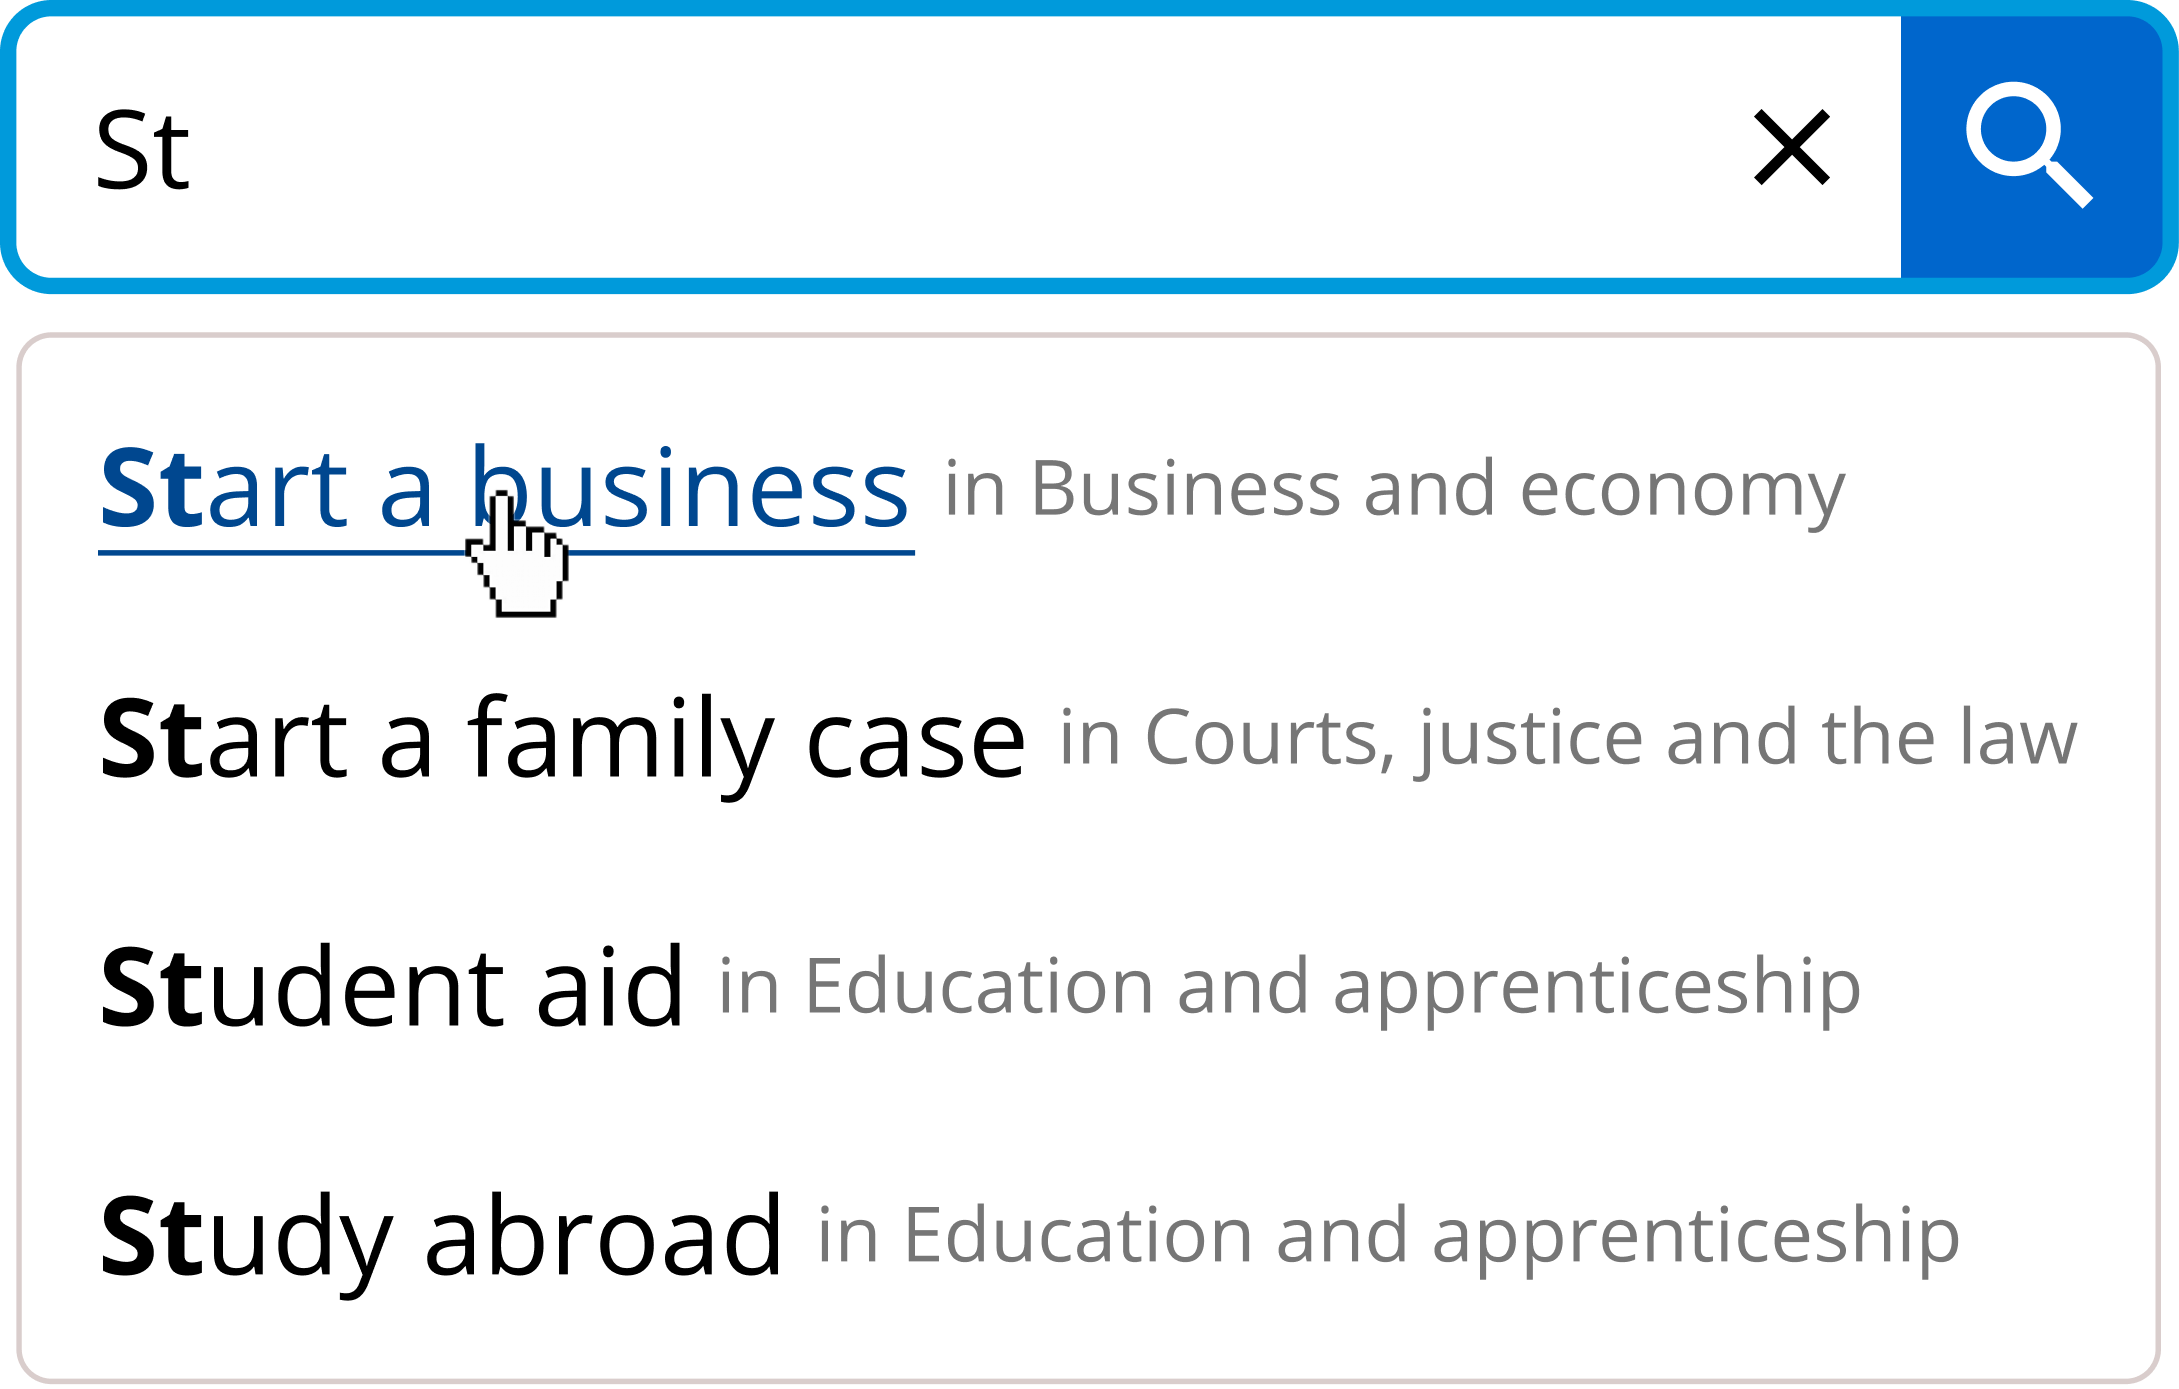 Search query with "St" and there is an autosuggest box with a few selections: Start a business in business and economy; Start a family in courts, justice and the law; Student aid in education and apprenticeship; Study abroad in education and apprenticeship.